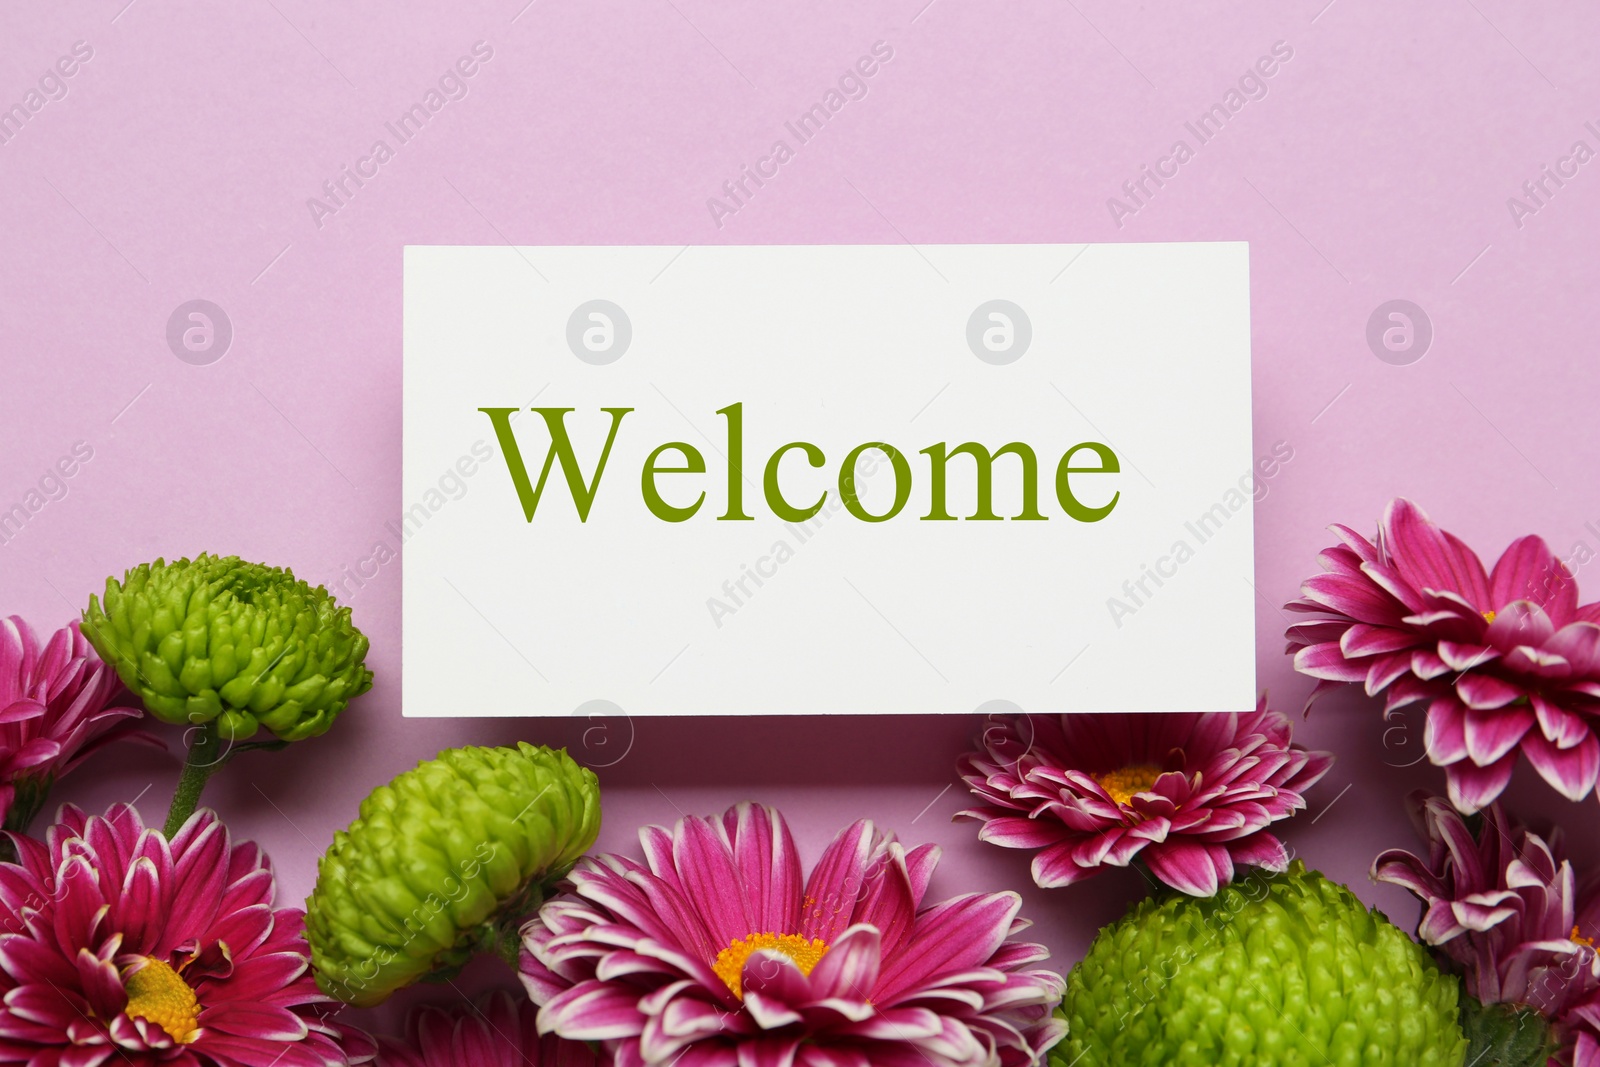 Image of Welcome card and beautiful flowers on pink background, top view